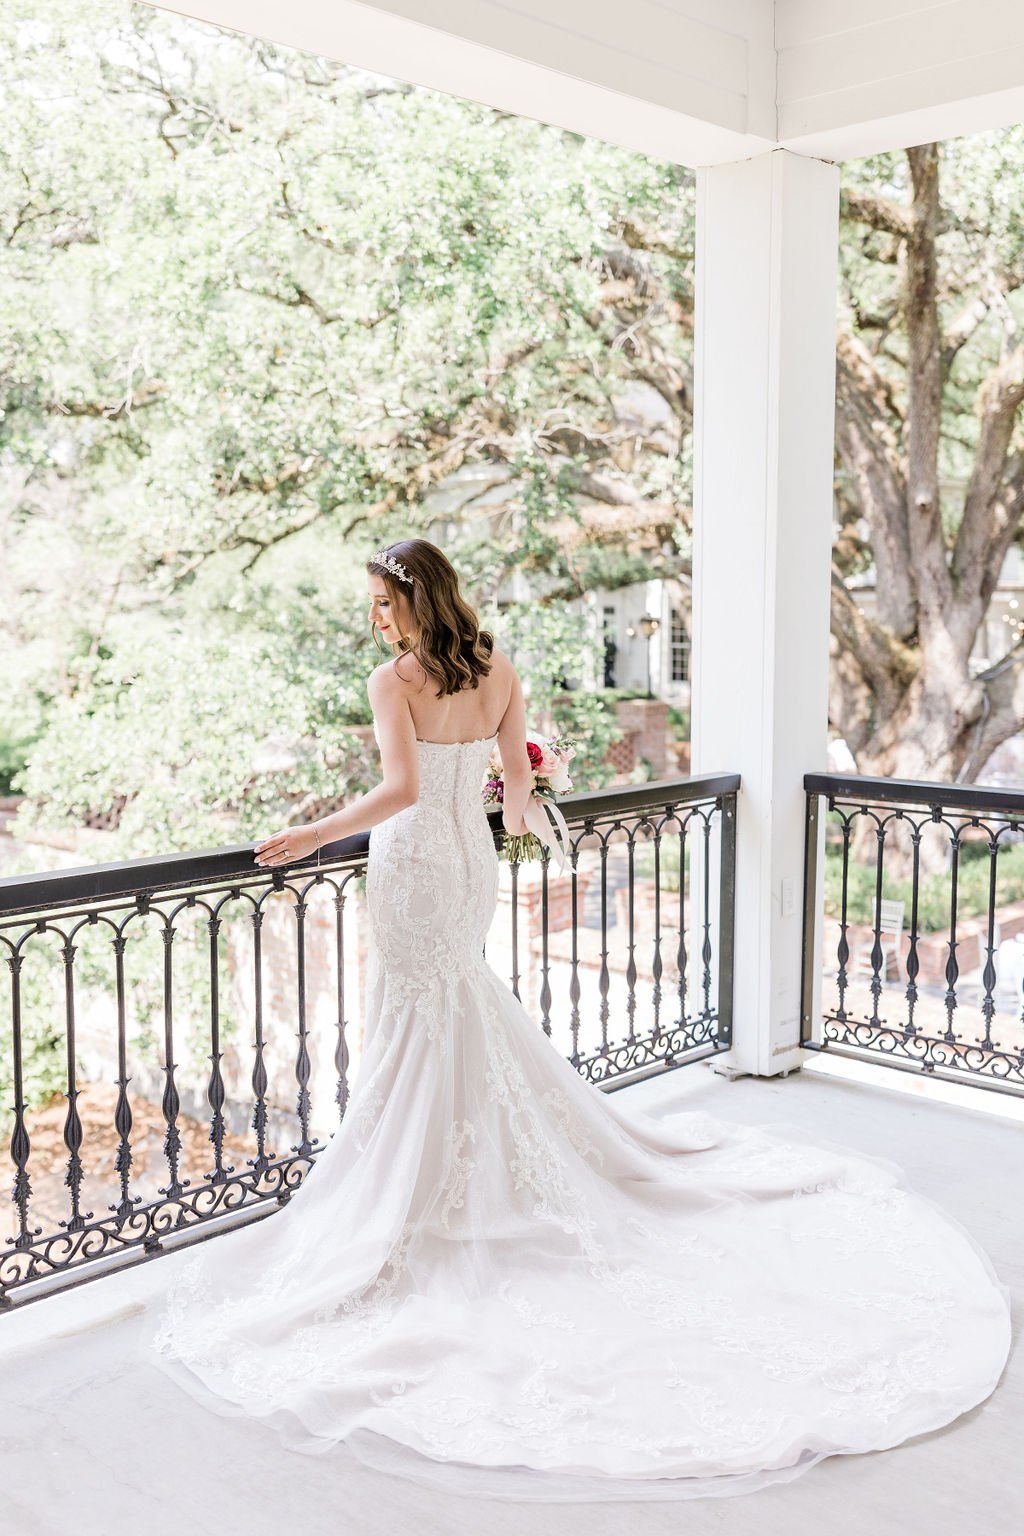 lydia-in-the-frederique-wedding-dress-by-maggie-sottero-a-fitted-lace-wedding-dress-with-a-sweetheart-neckline-purchased-from-savannah-bridal-shop-ivory-and-beau-5.jpg